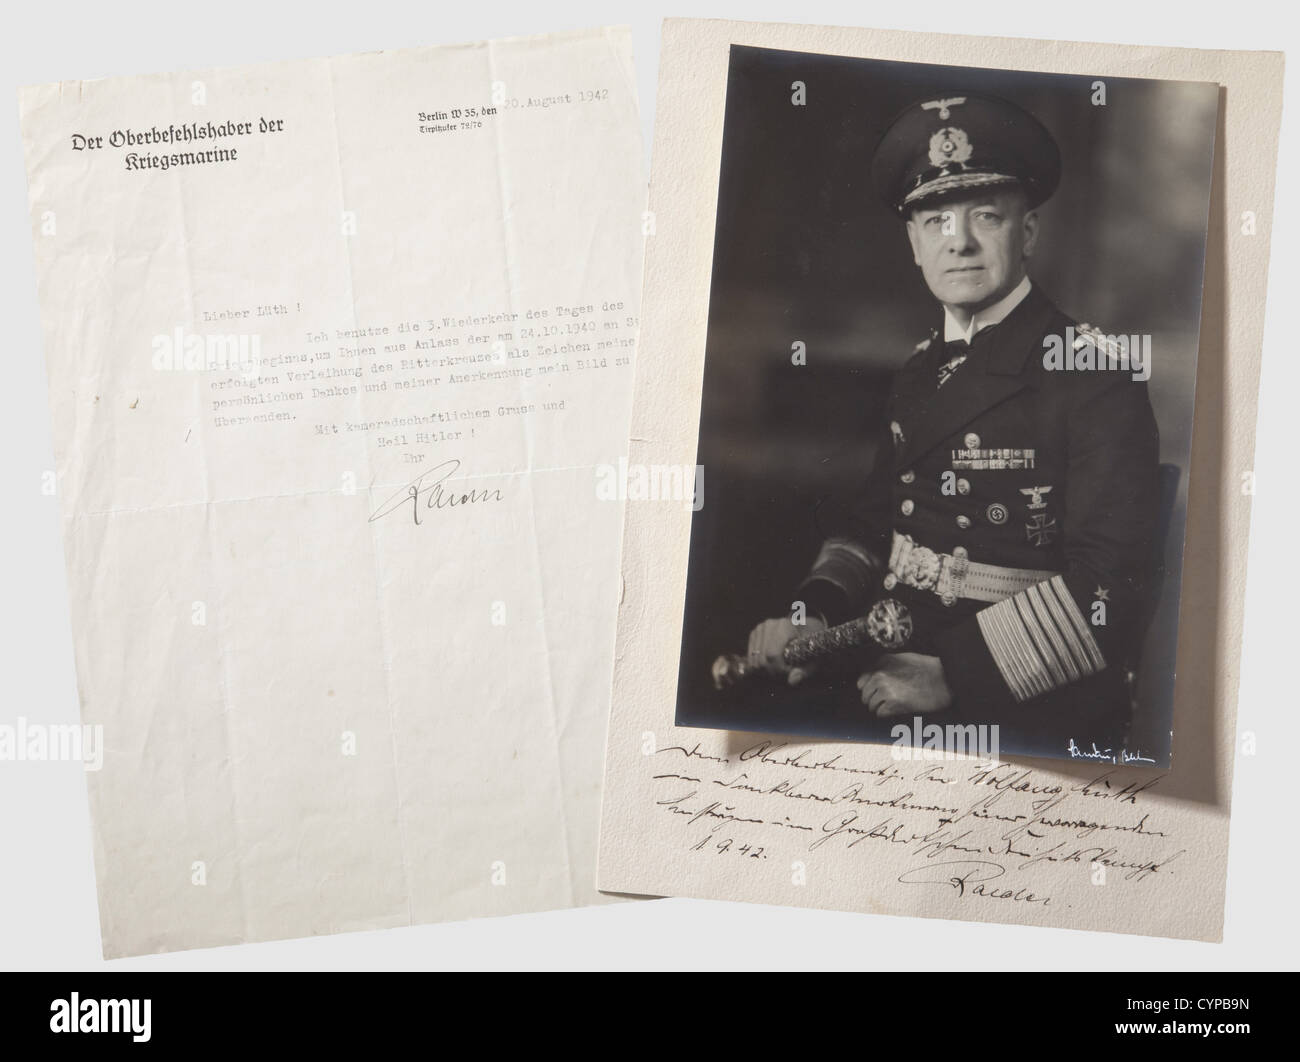 Grand Admiral Erich Raeder, An official photograph dedicated to U-boat Captain, Wolfgang Lüth The Kriegsmarine Commander in Chief in uniform with his Grand Admiral's baton, and wearing the Knight's Cross. The photographer's signature, 'Sandau, Berlin,' at the lowe people, 1930s, 20th century, navy, naval forces, military, militaria, branch of service, branches of service, armed forces, armed service, object, objects, stills, clipping, clippings, cut out, cut-out, cut-outs, man, men, male, Stock Photo